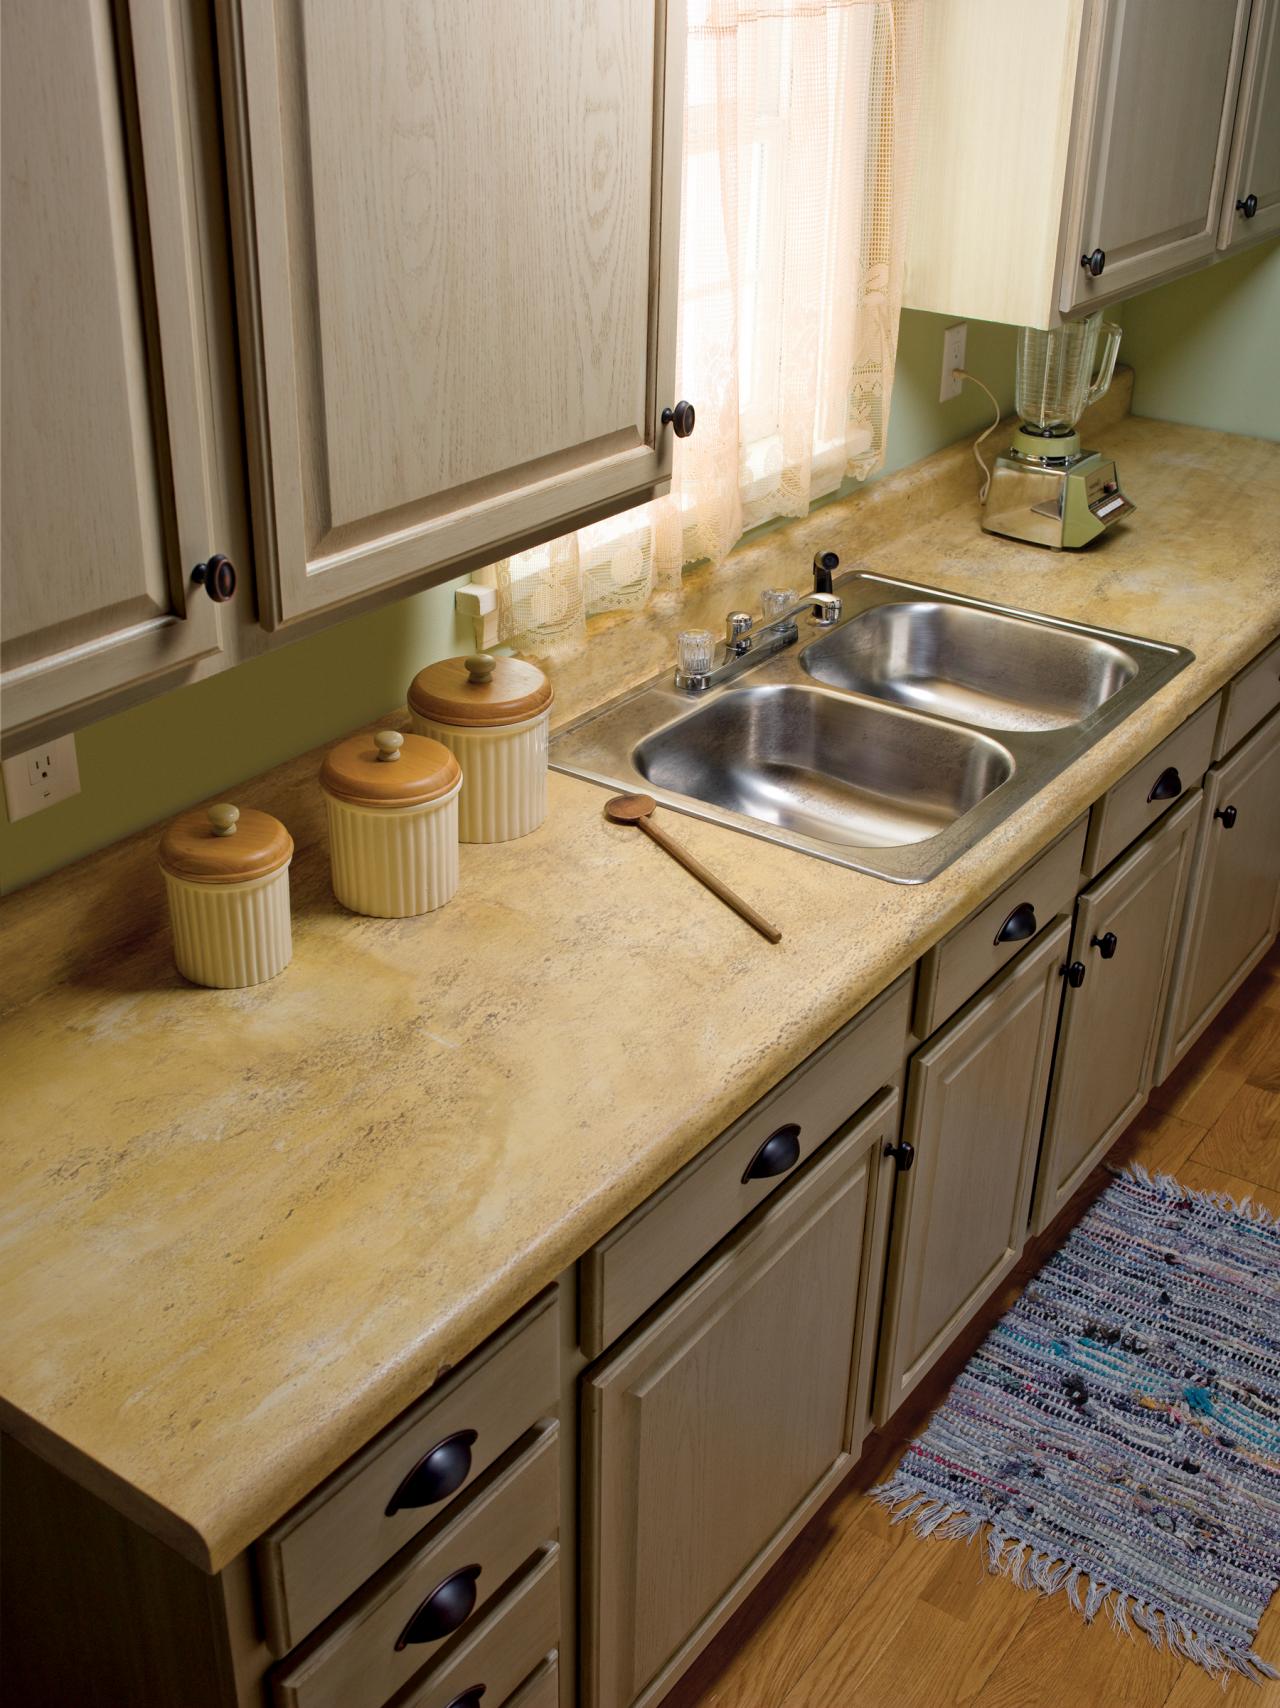 Refinish Laminate Countertops, Can You Glue New Laminate Over Old Countertops